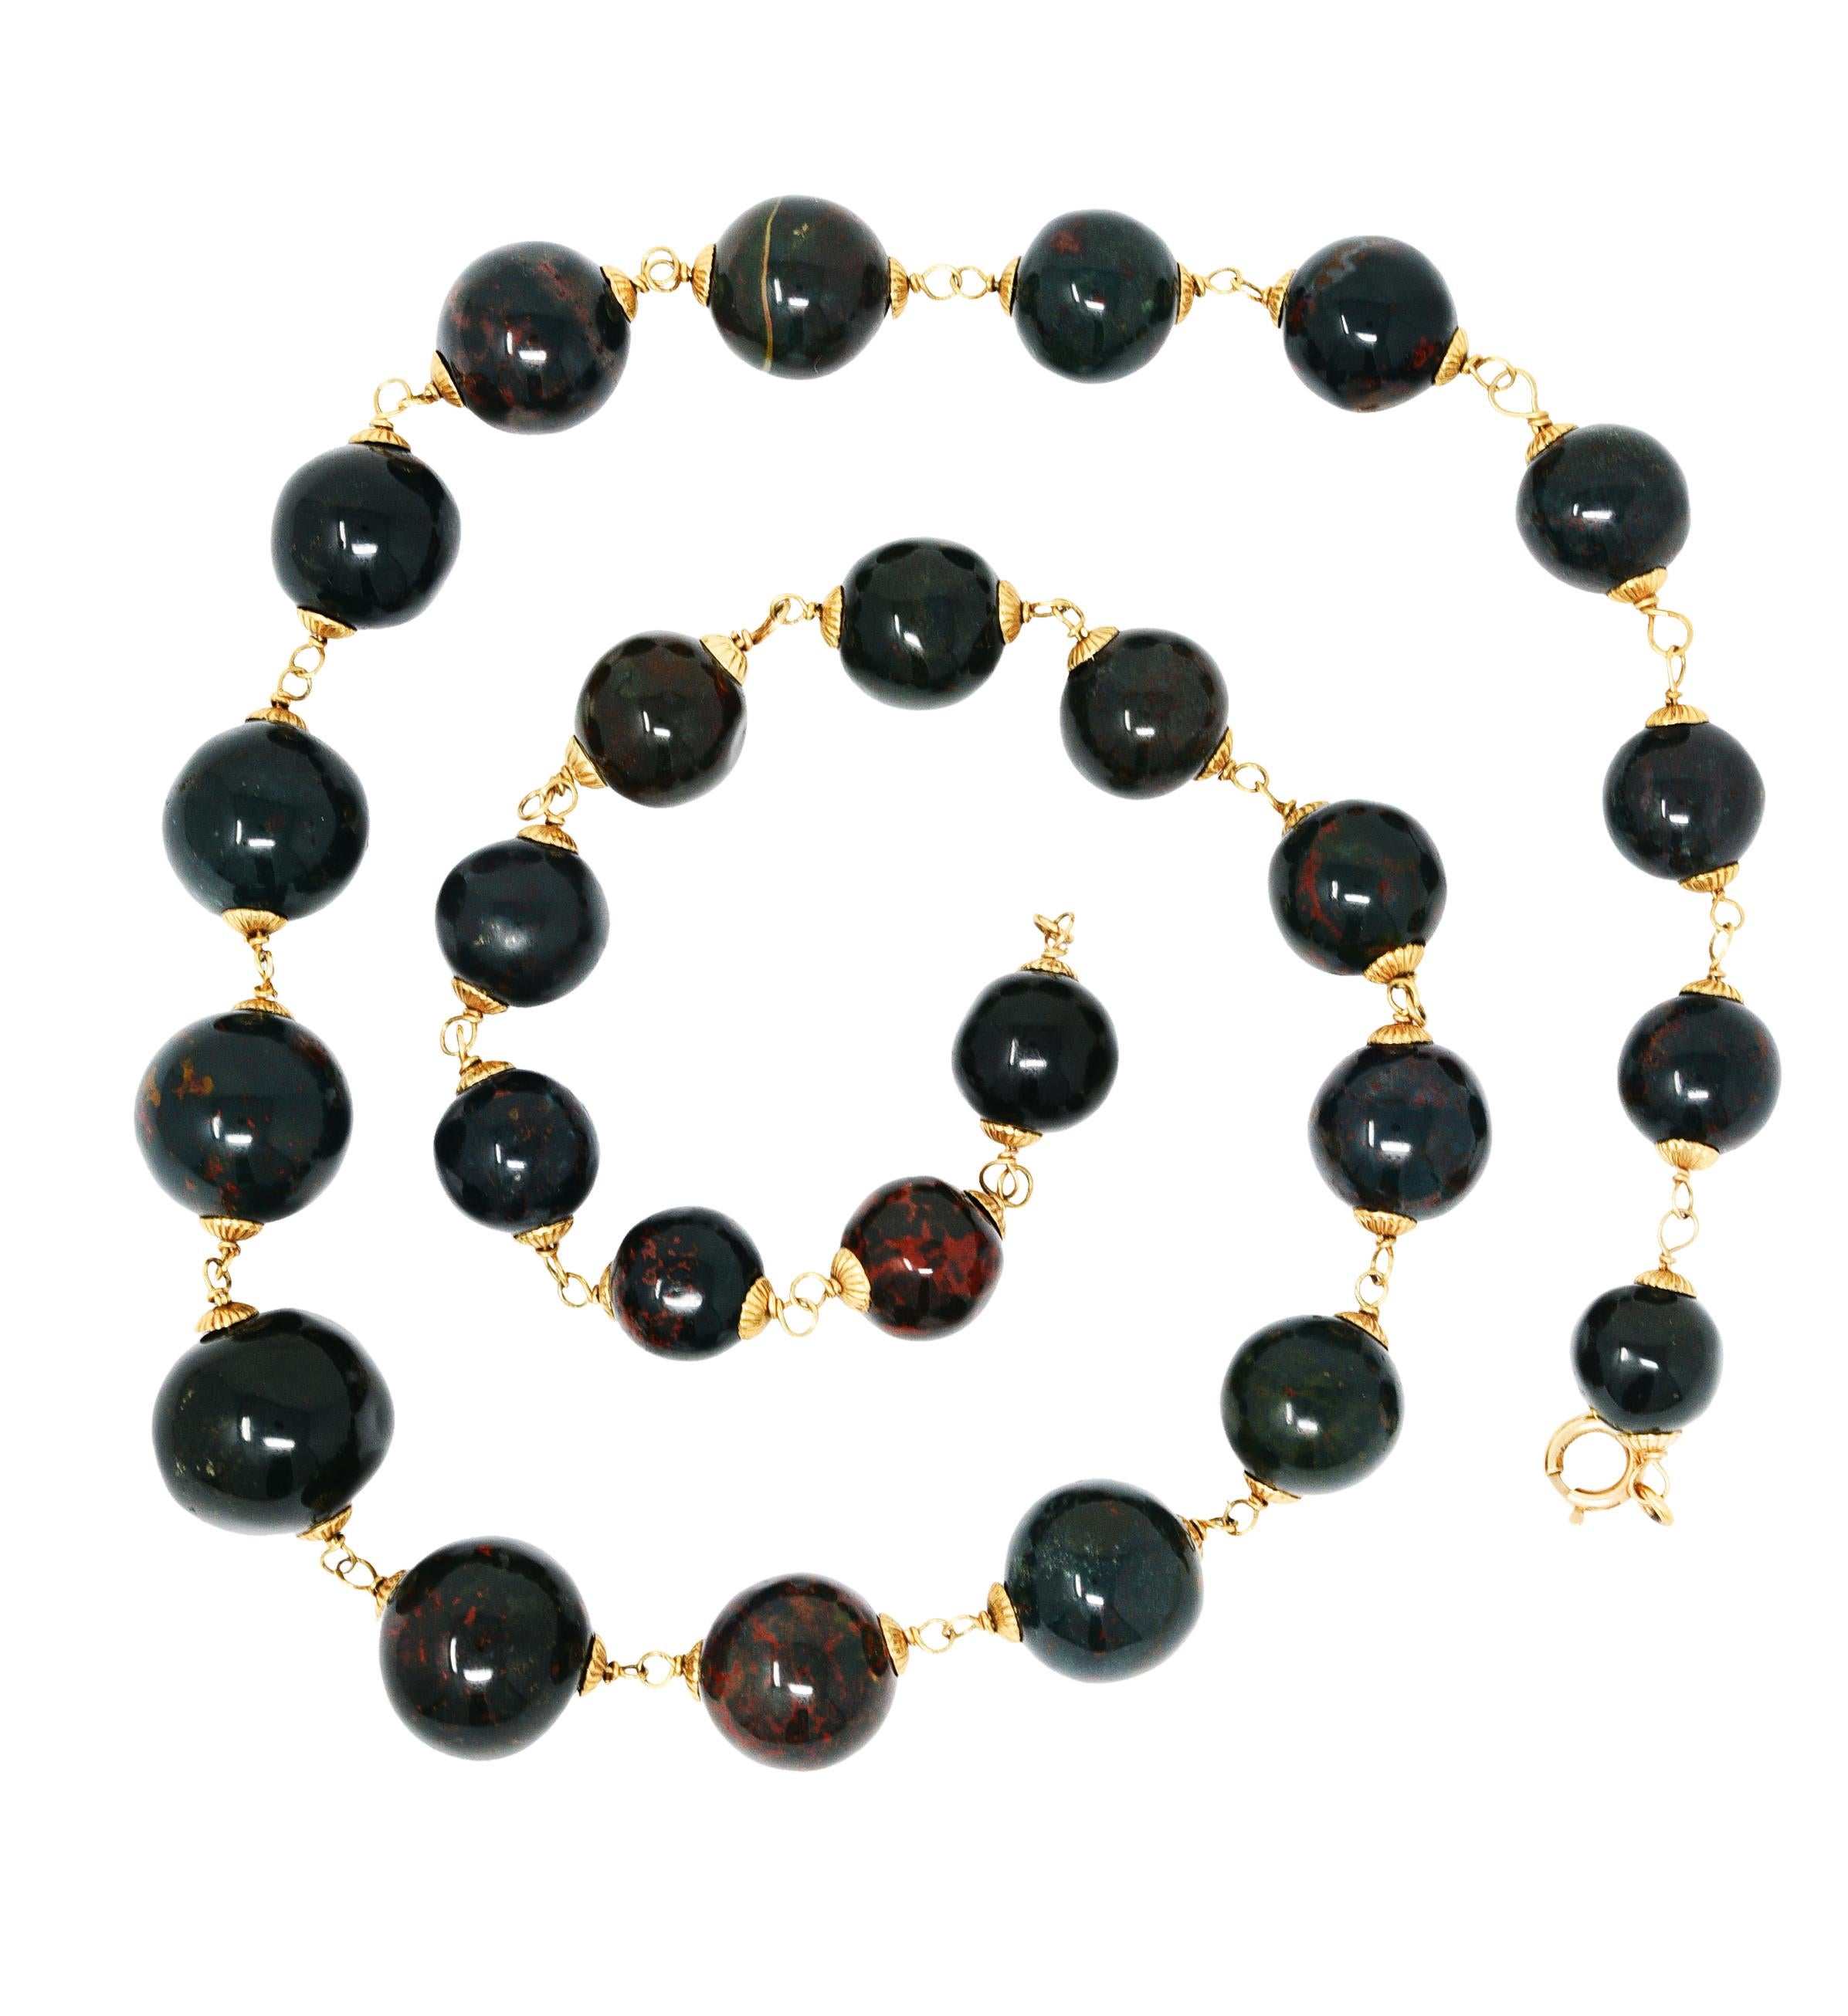 Necklace is comprised of round bloodstone beads measuring from 18.5 mm to 12.5 mm - graduated in size

Opaque bluish green to medium dark green with mild to strong red/orange mottling

Pigtailed in a strand via ribbed gold end caps flanking each